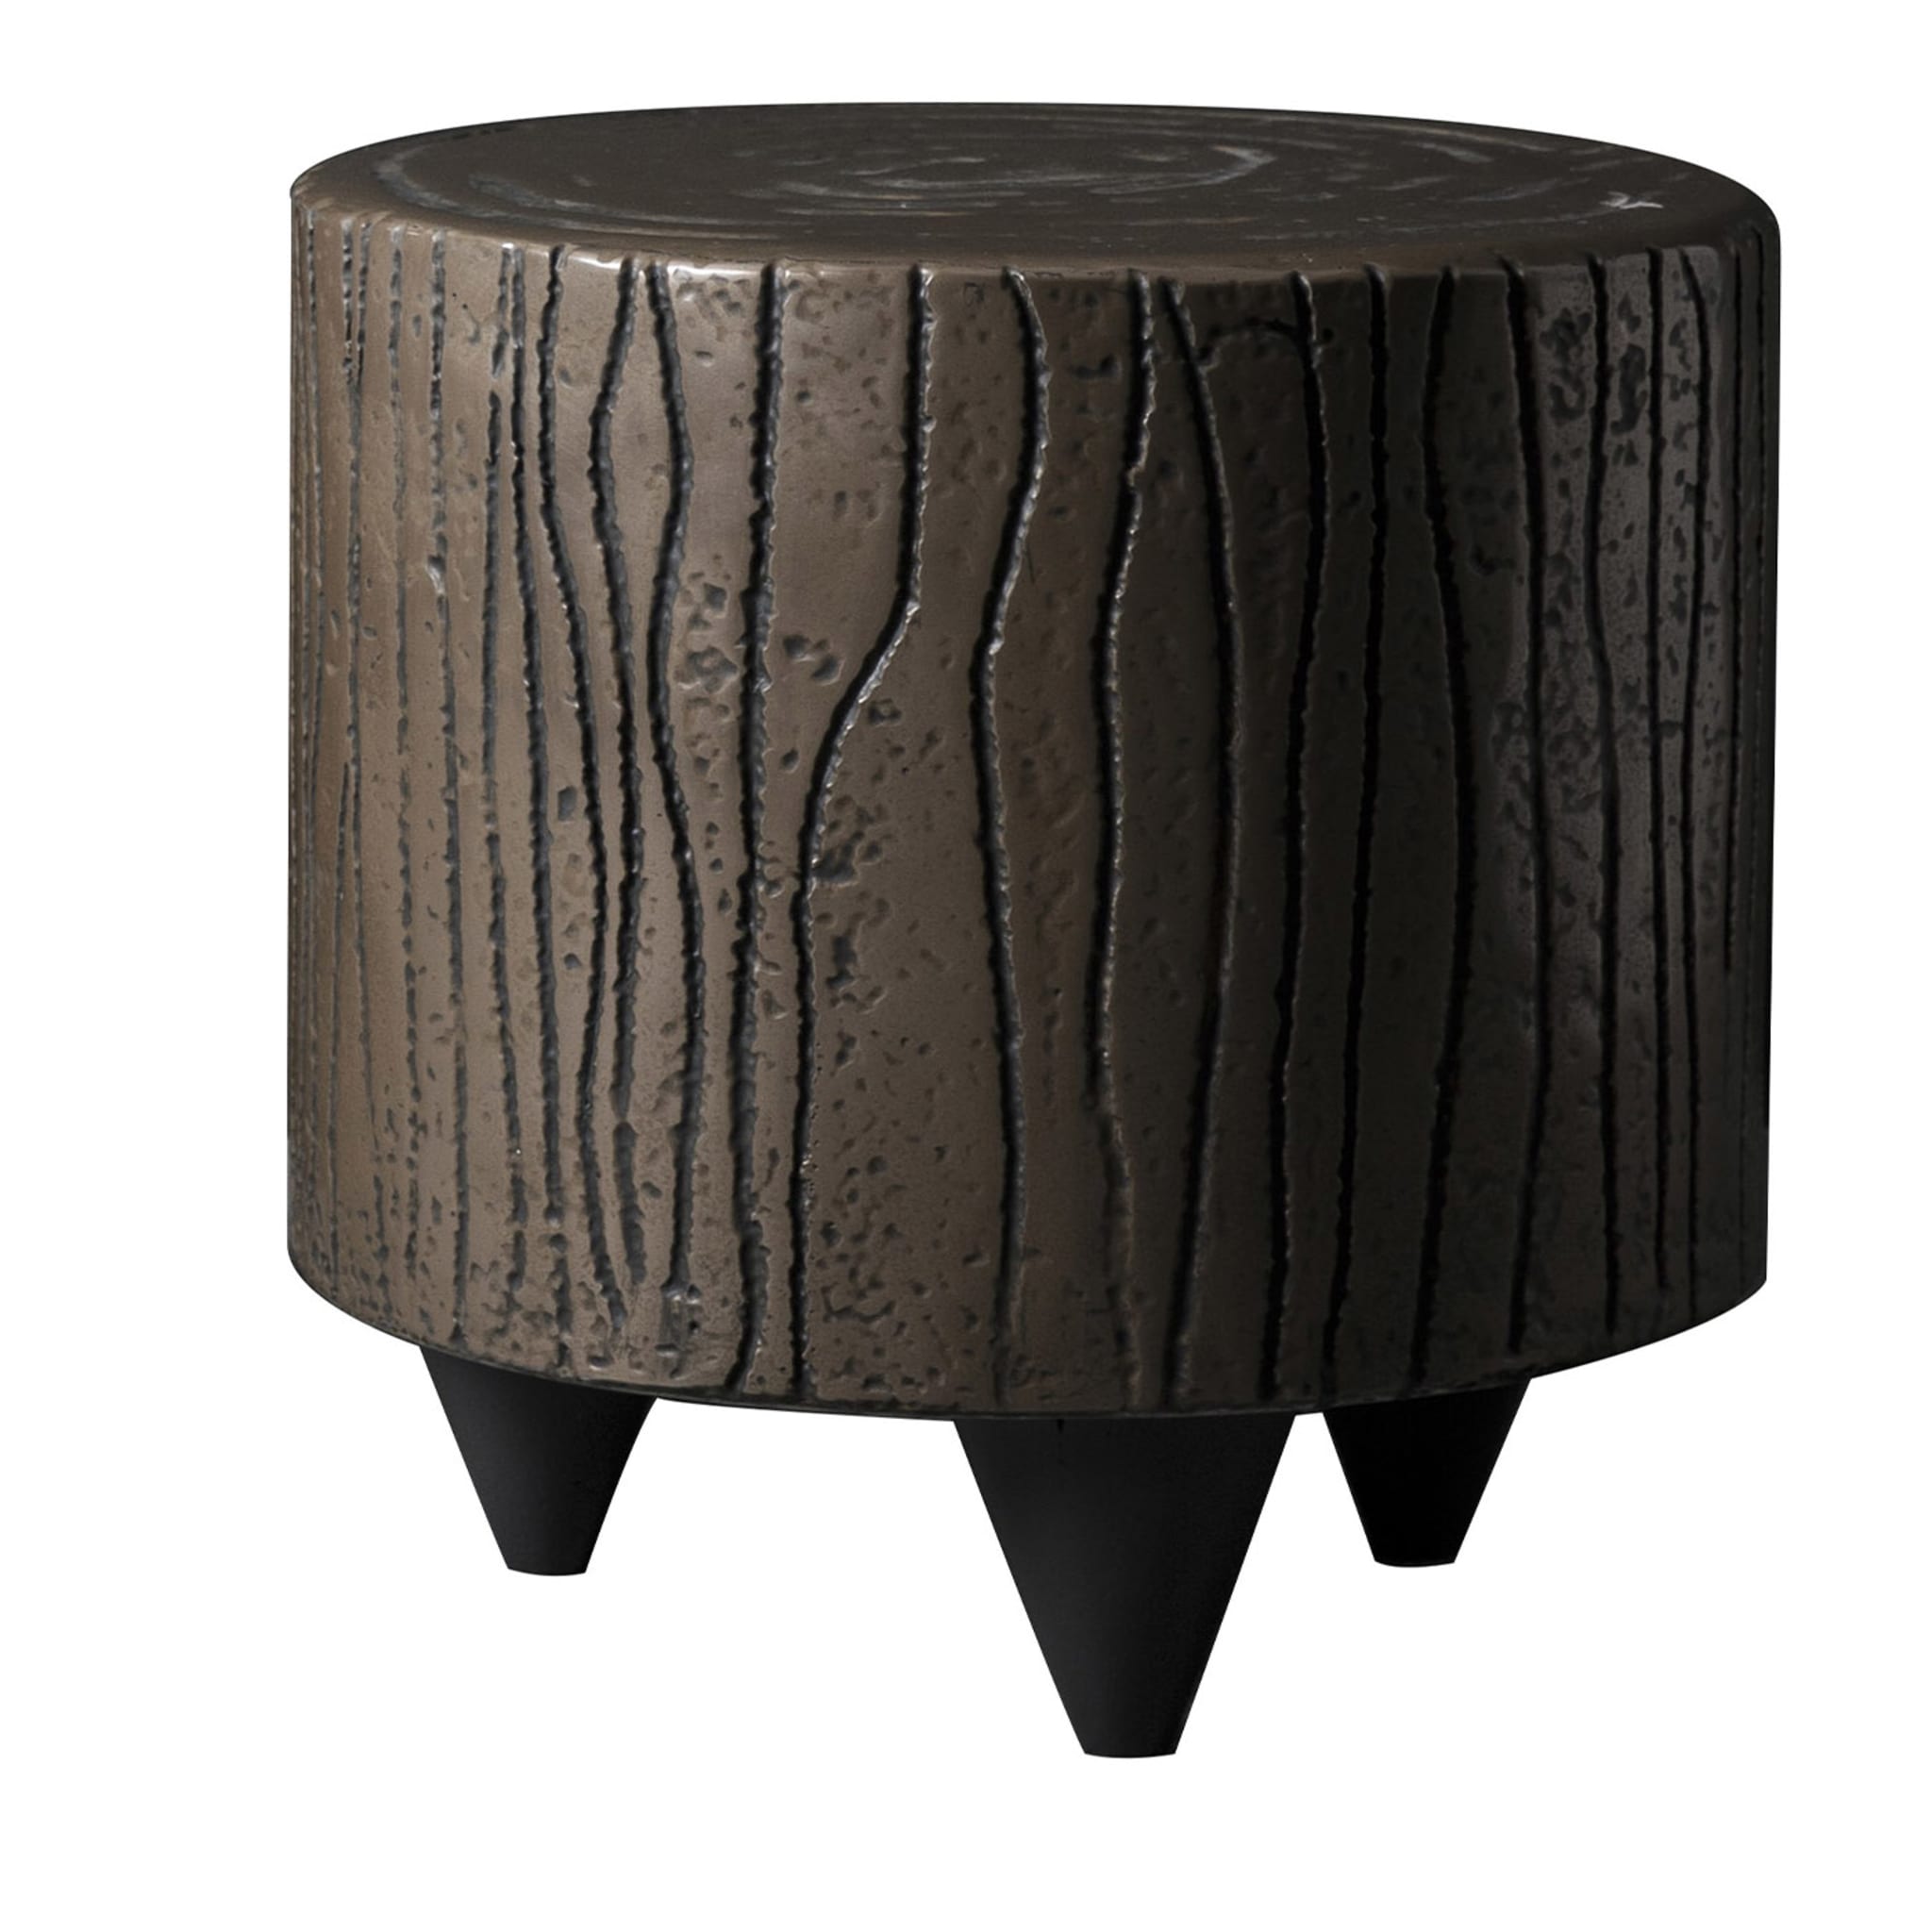 Low Bronze Pouf and Side Table #2 - Main view